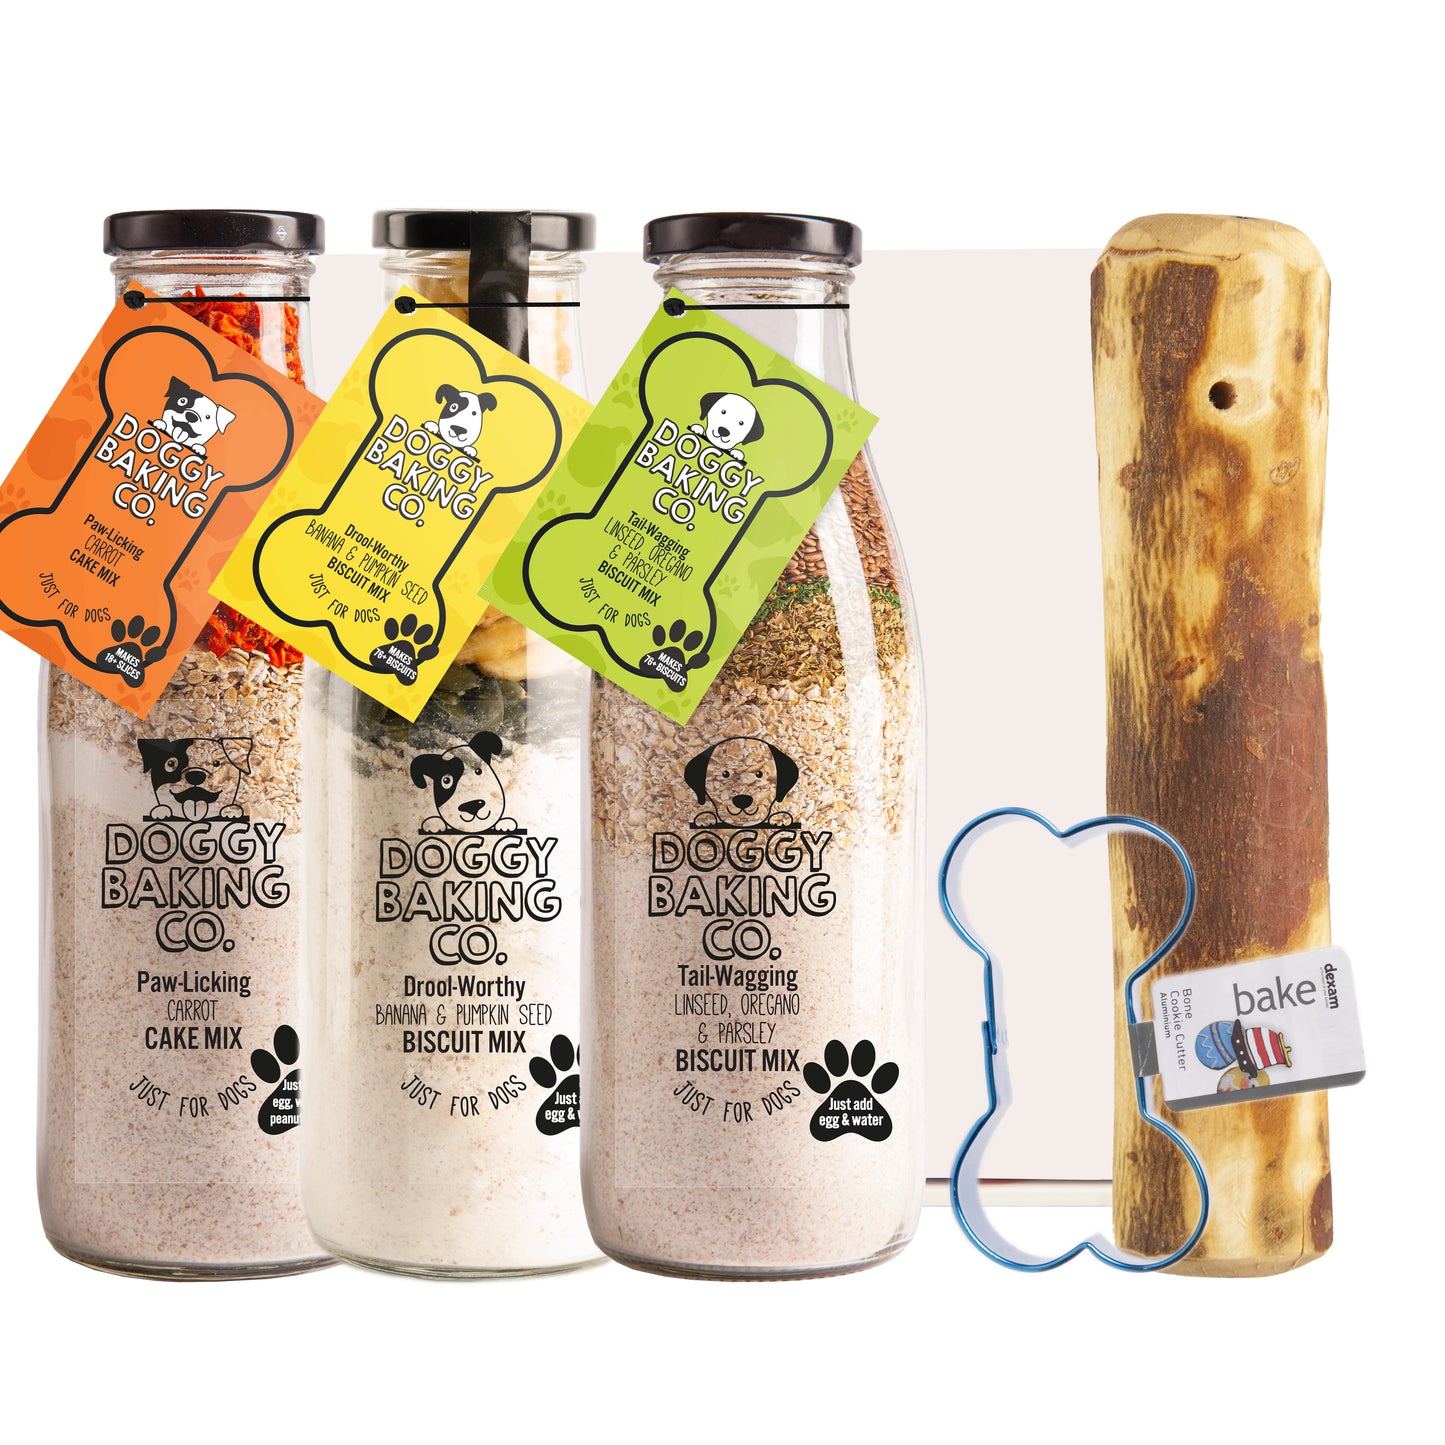 Ultimate Doggy Baking Bottles, Bone Cutter & Olivewood Chew in a Gift Box